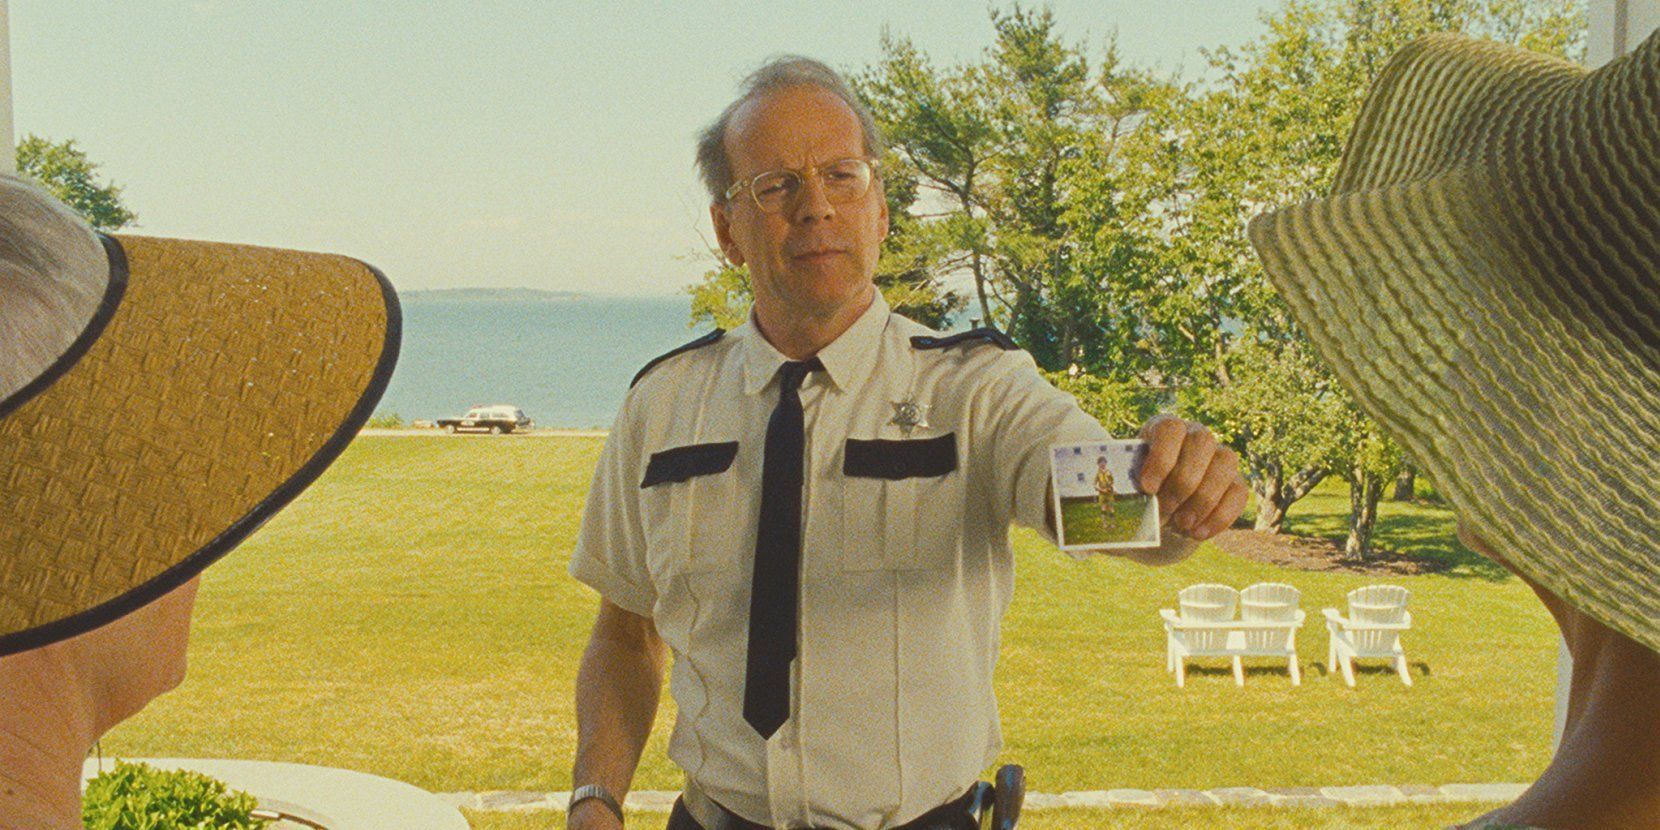 Captain Sharp holds up a photograph of a boy in Moonrise Kingdom